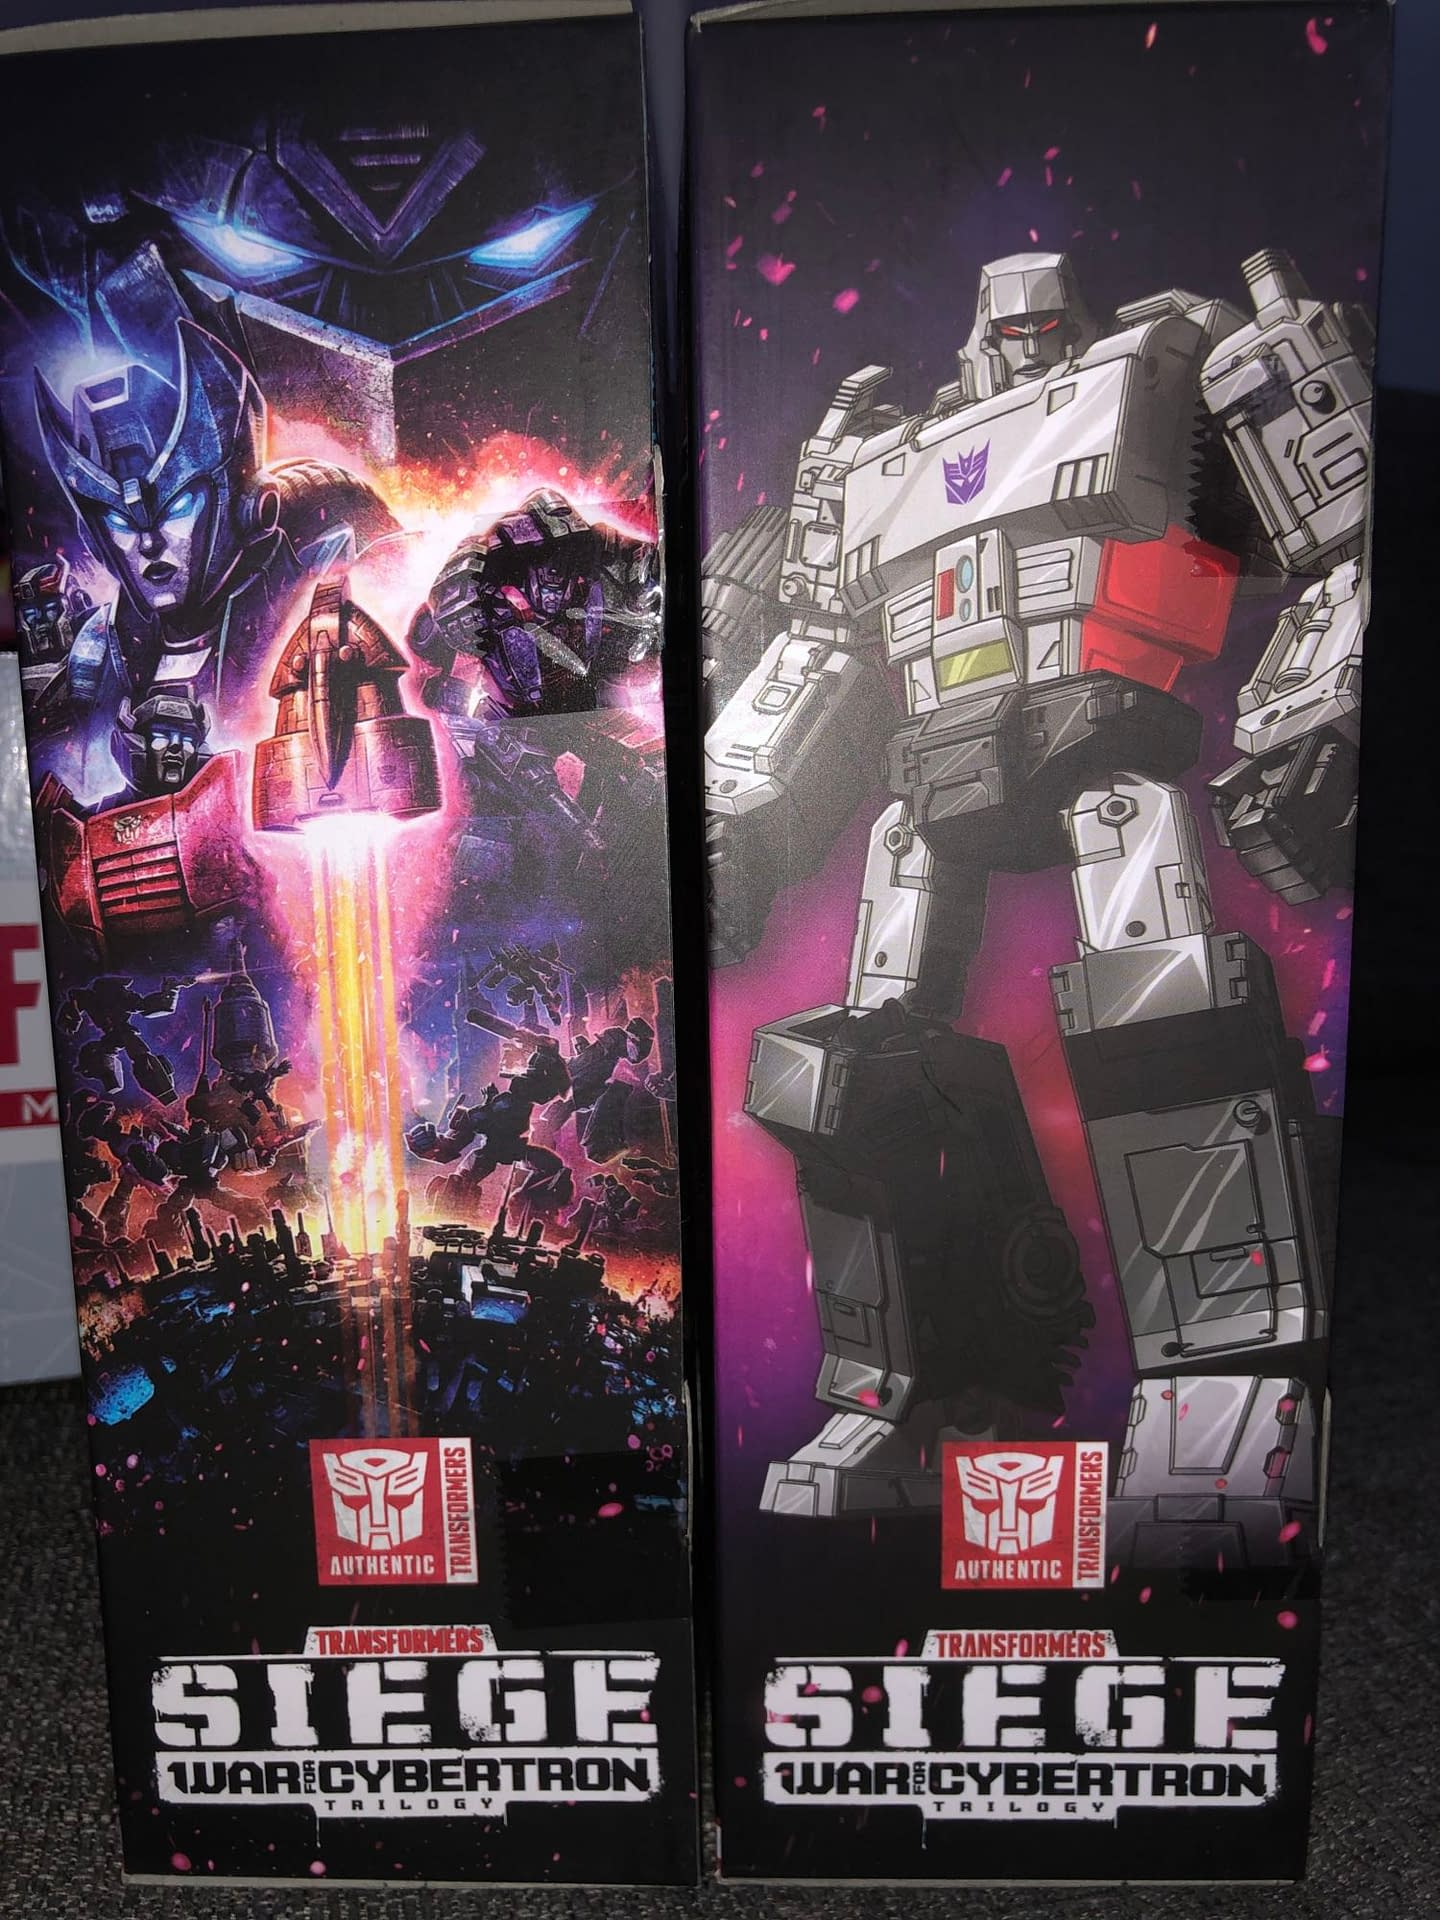 Transformers Holiday Guide Thats More Than Meets the Eye